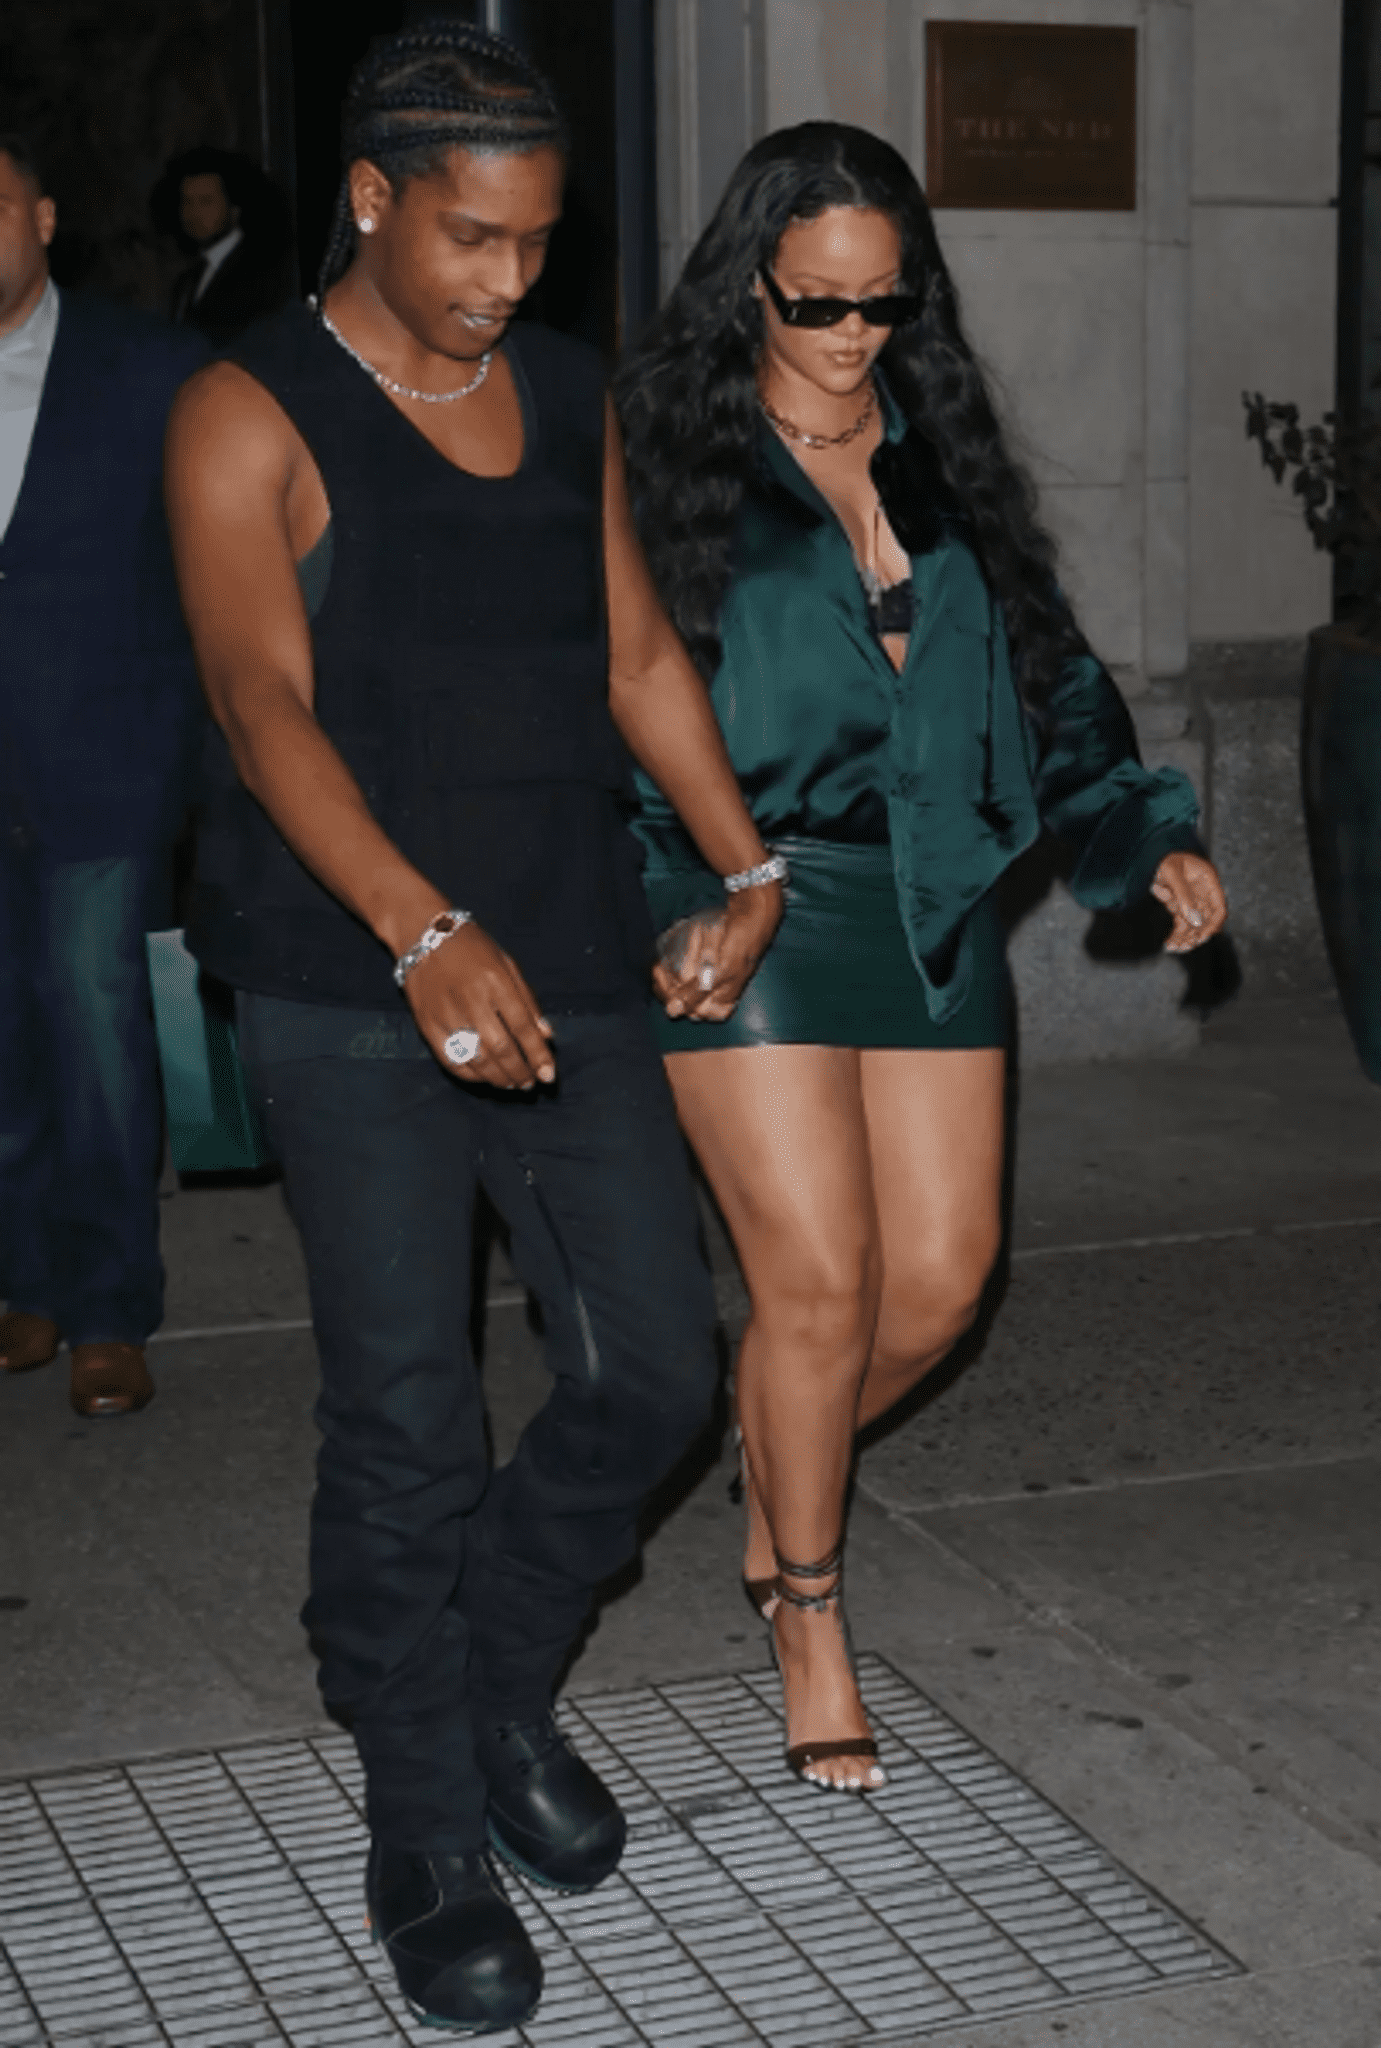 Rihanna Dresses Revealingly For A Date With A$AP Rocky In A Leather Miniskirt